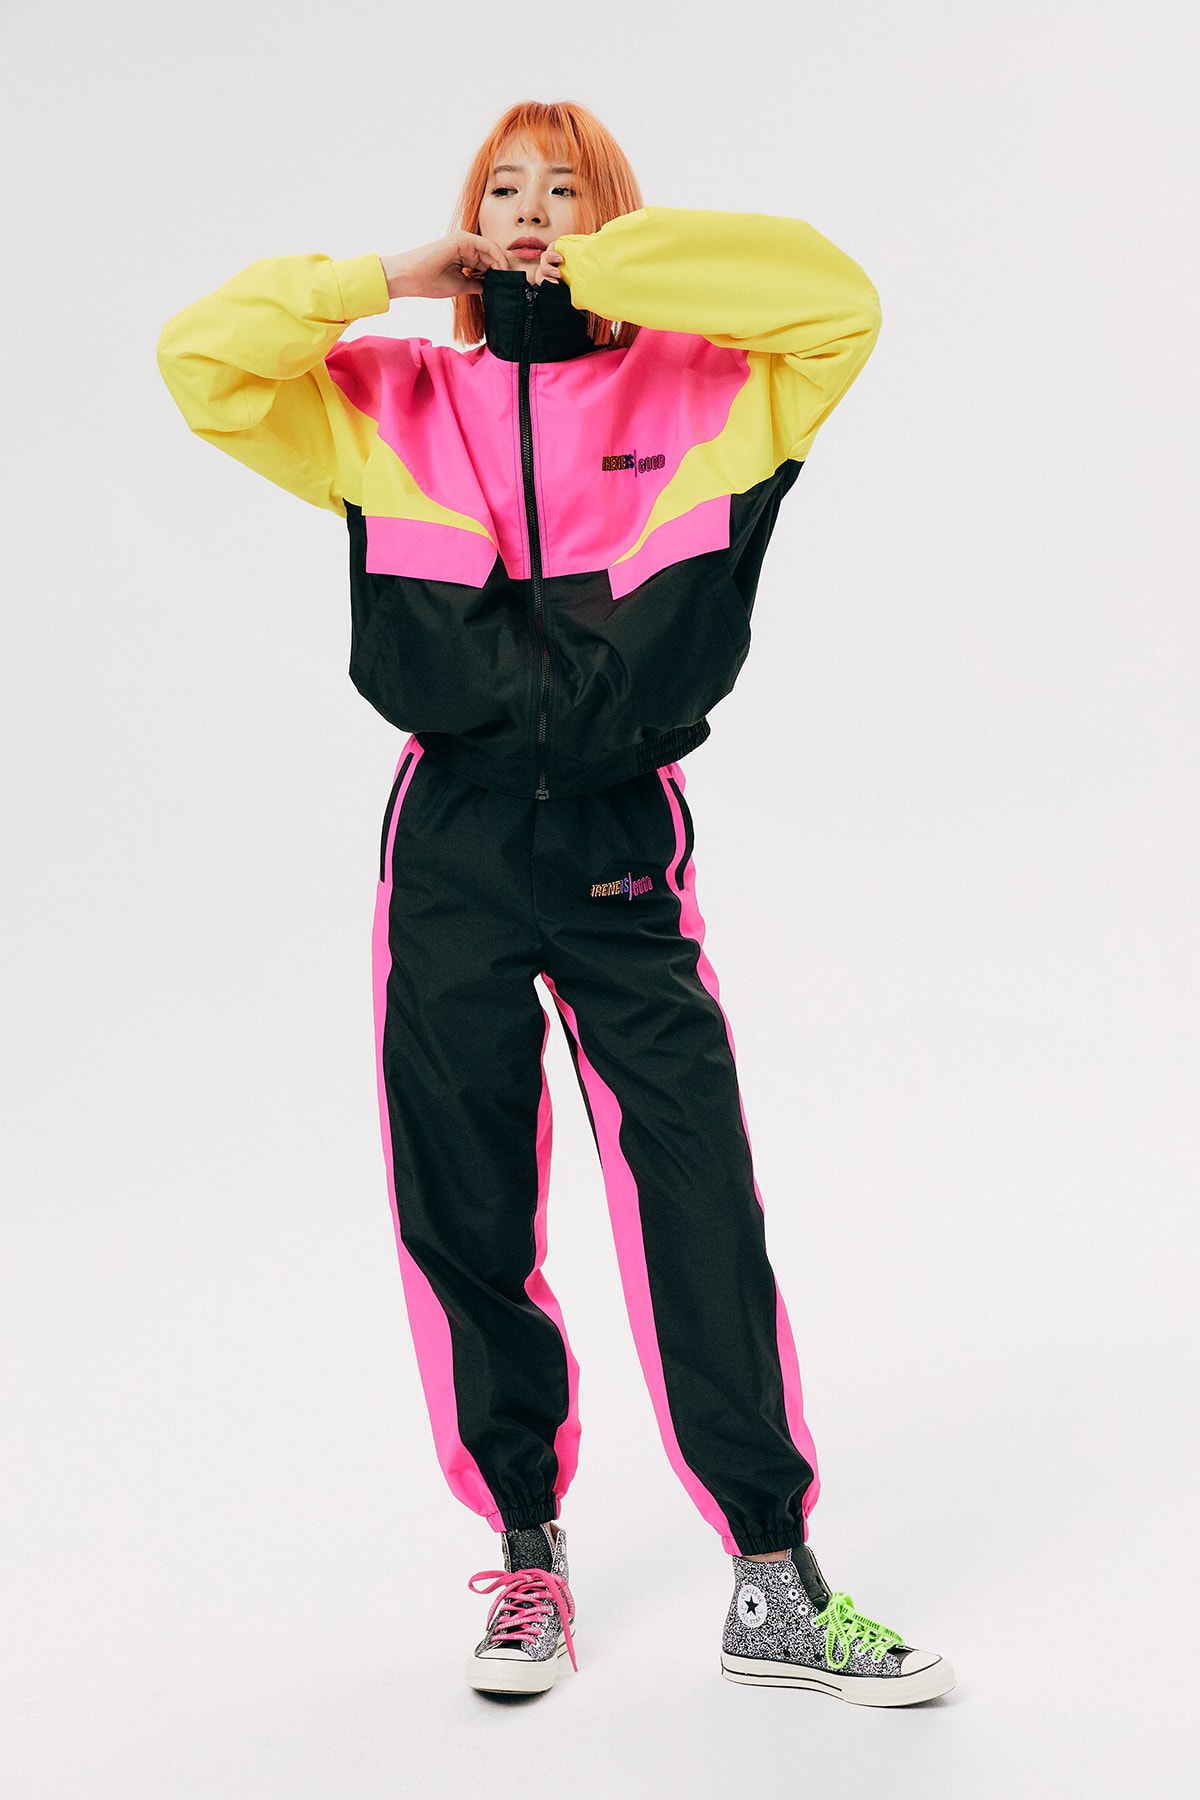 IRENEISGOOD Label Fall/Winter 2020 Collection Lookbook Tracksuit Yellow Pink Black